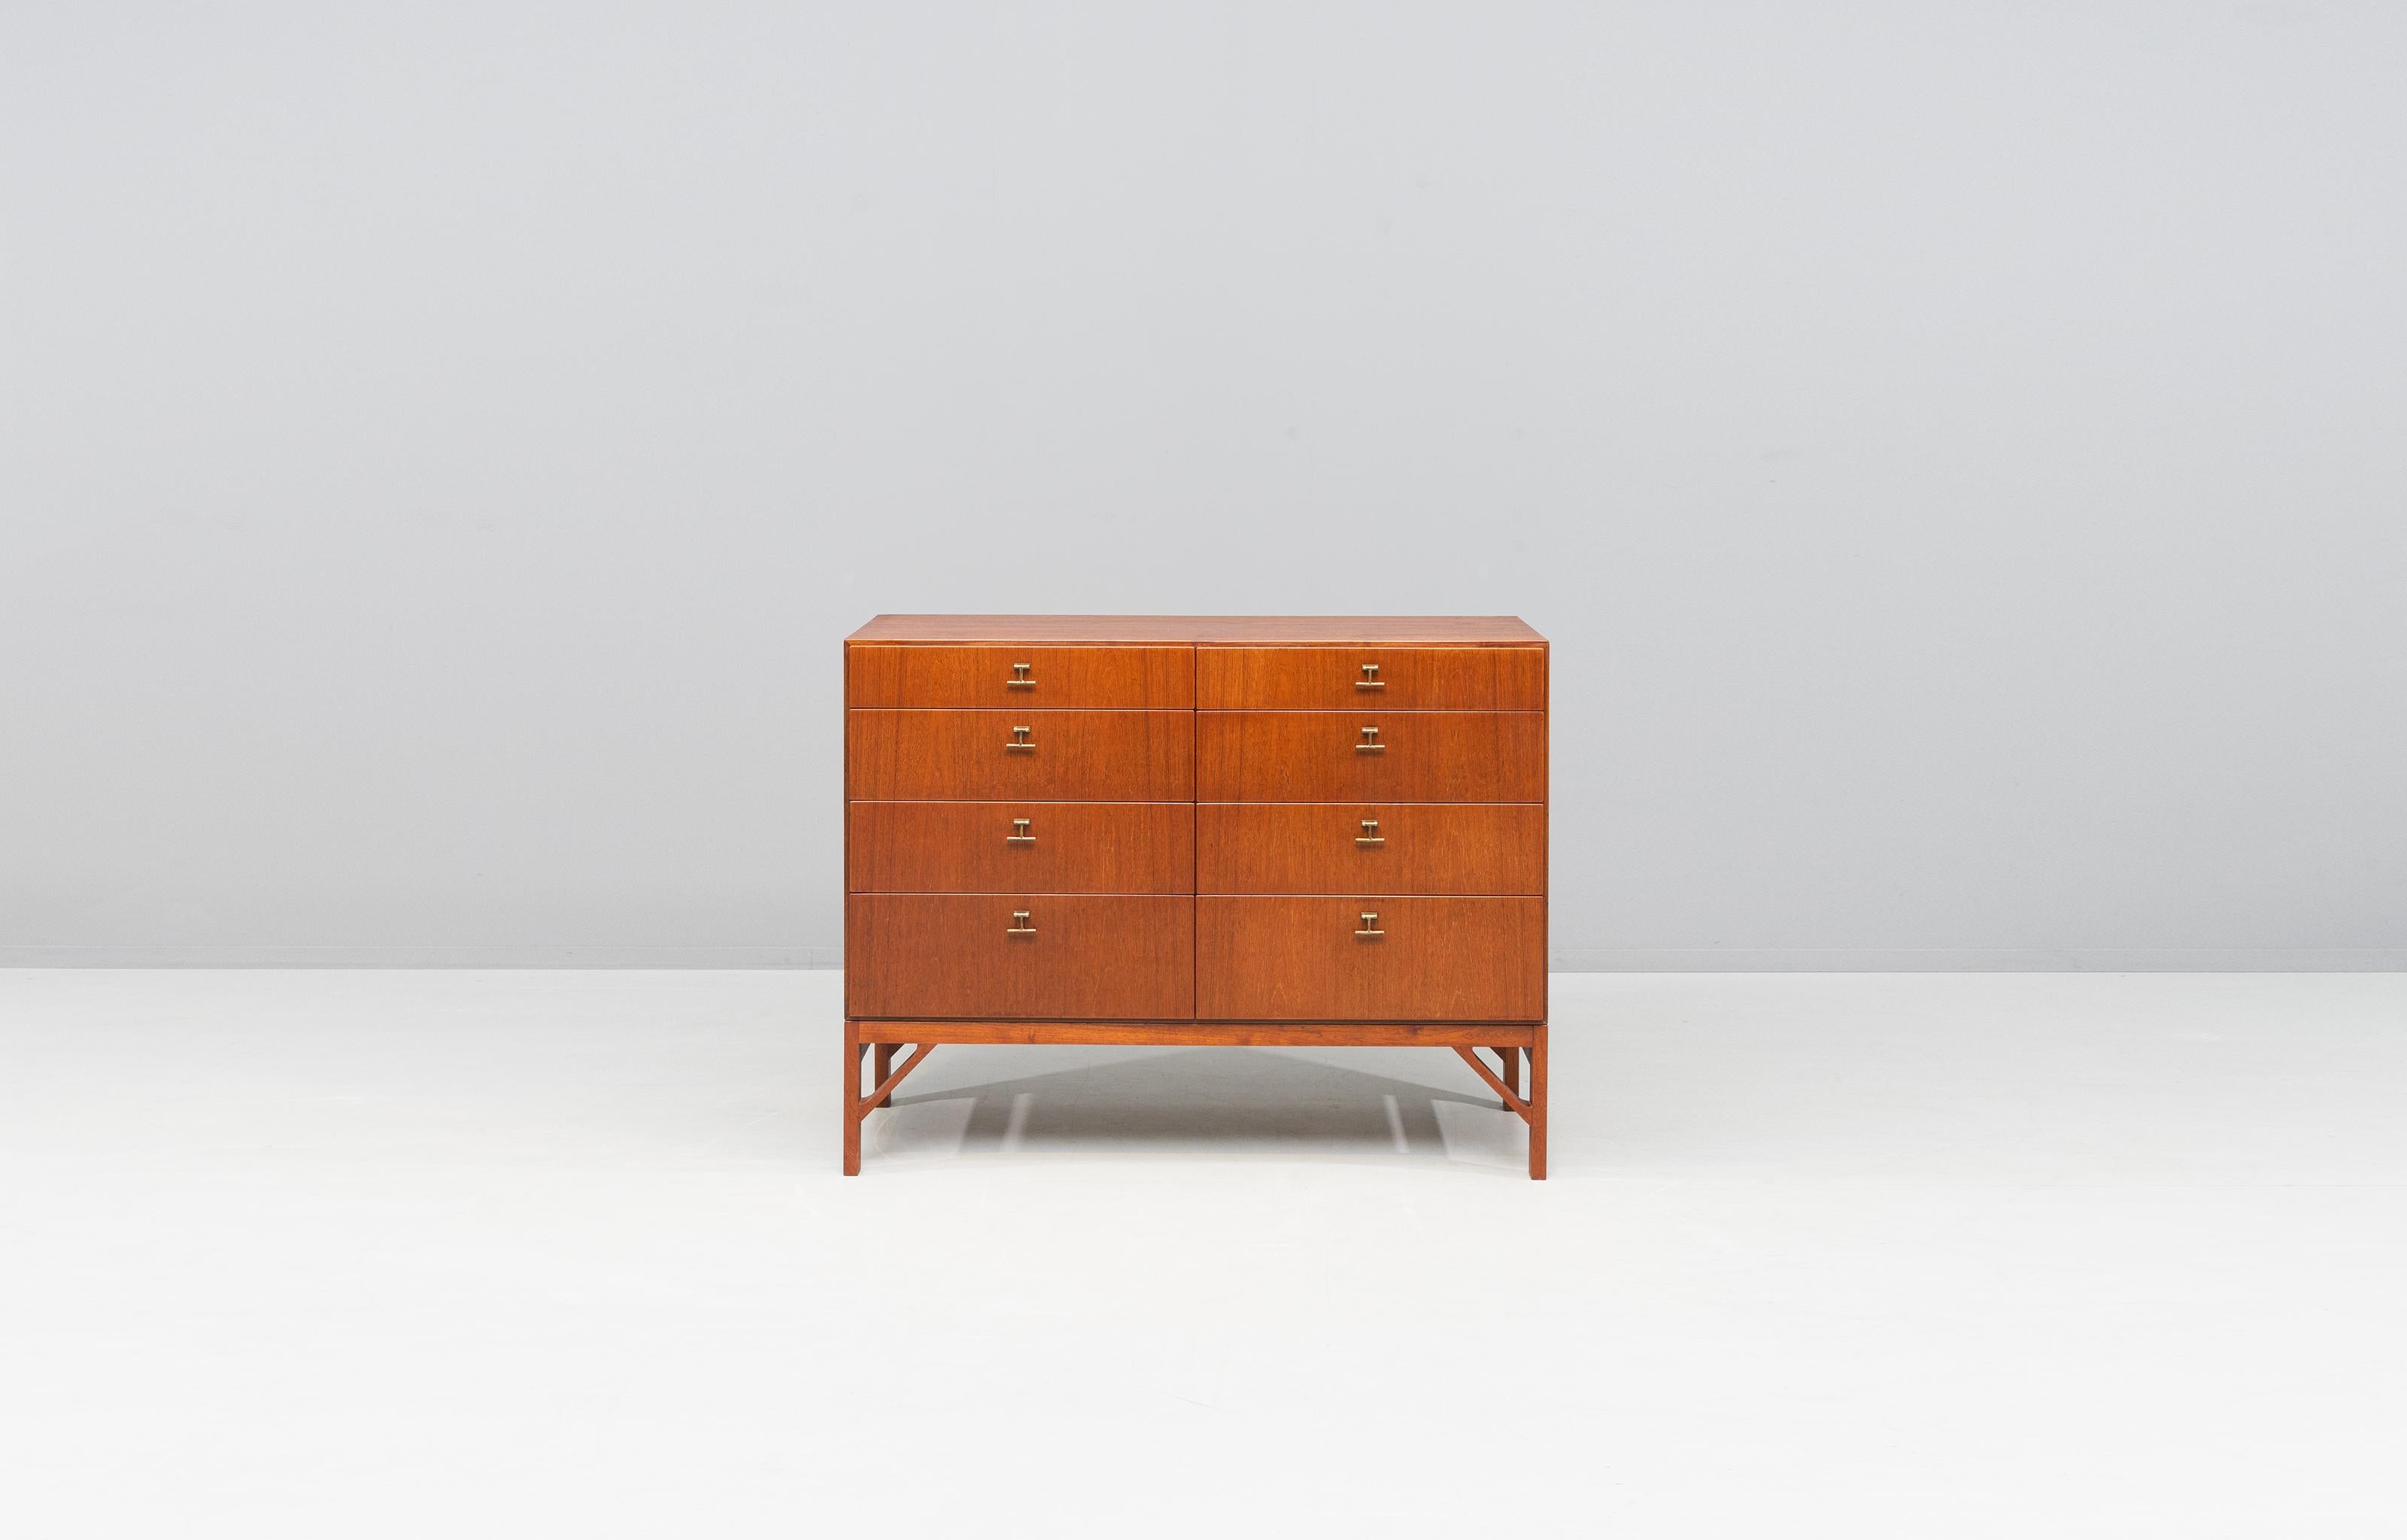 Beautiful teak cabinet with eight drawers and brass handles. Designed by Børge Mogensen in the 1960s, produced by FDB Møbler. Model 234, stamped by FDB on the backside.

Light wear consistent with age and use.